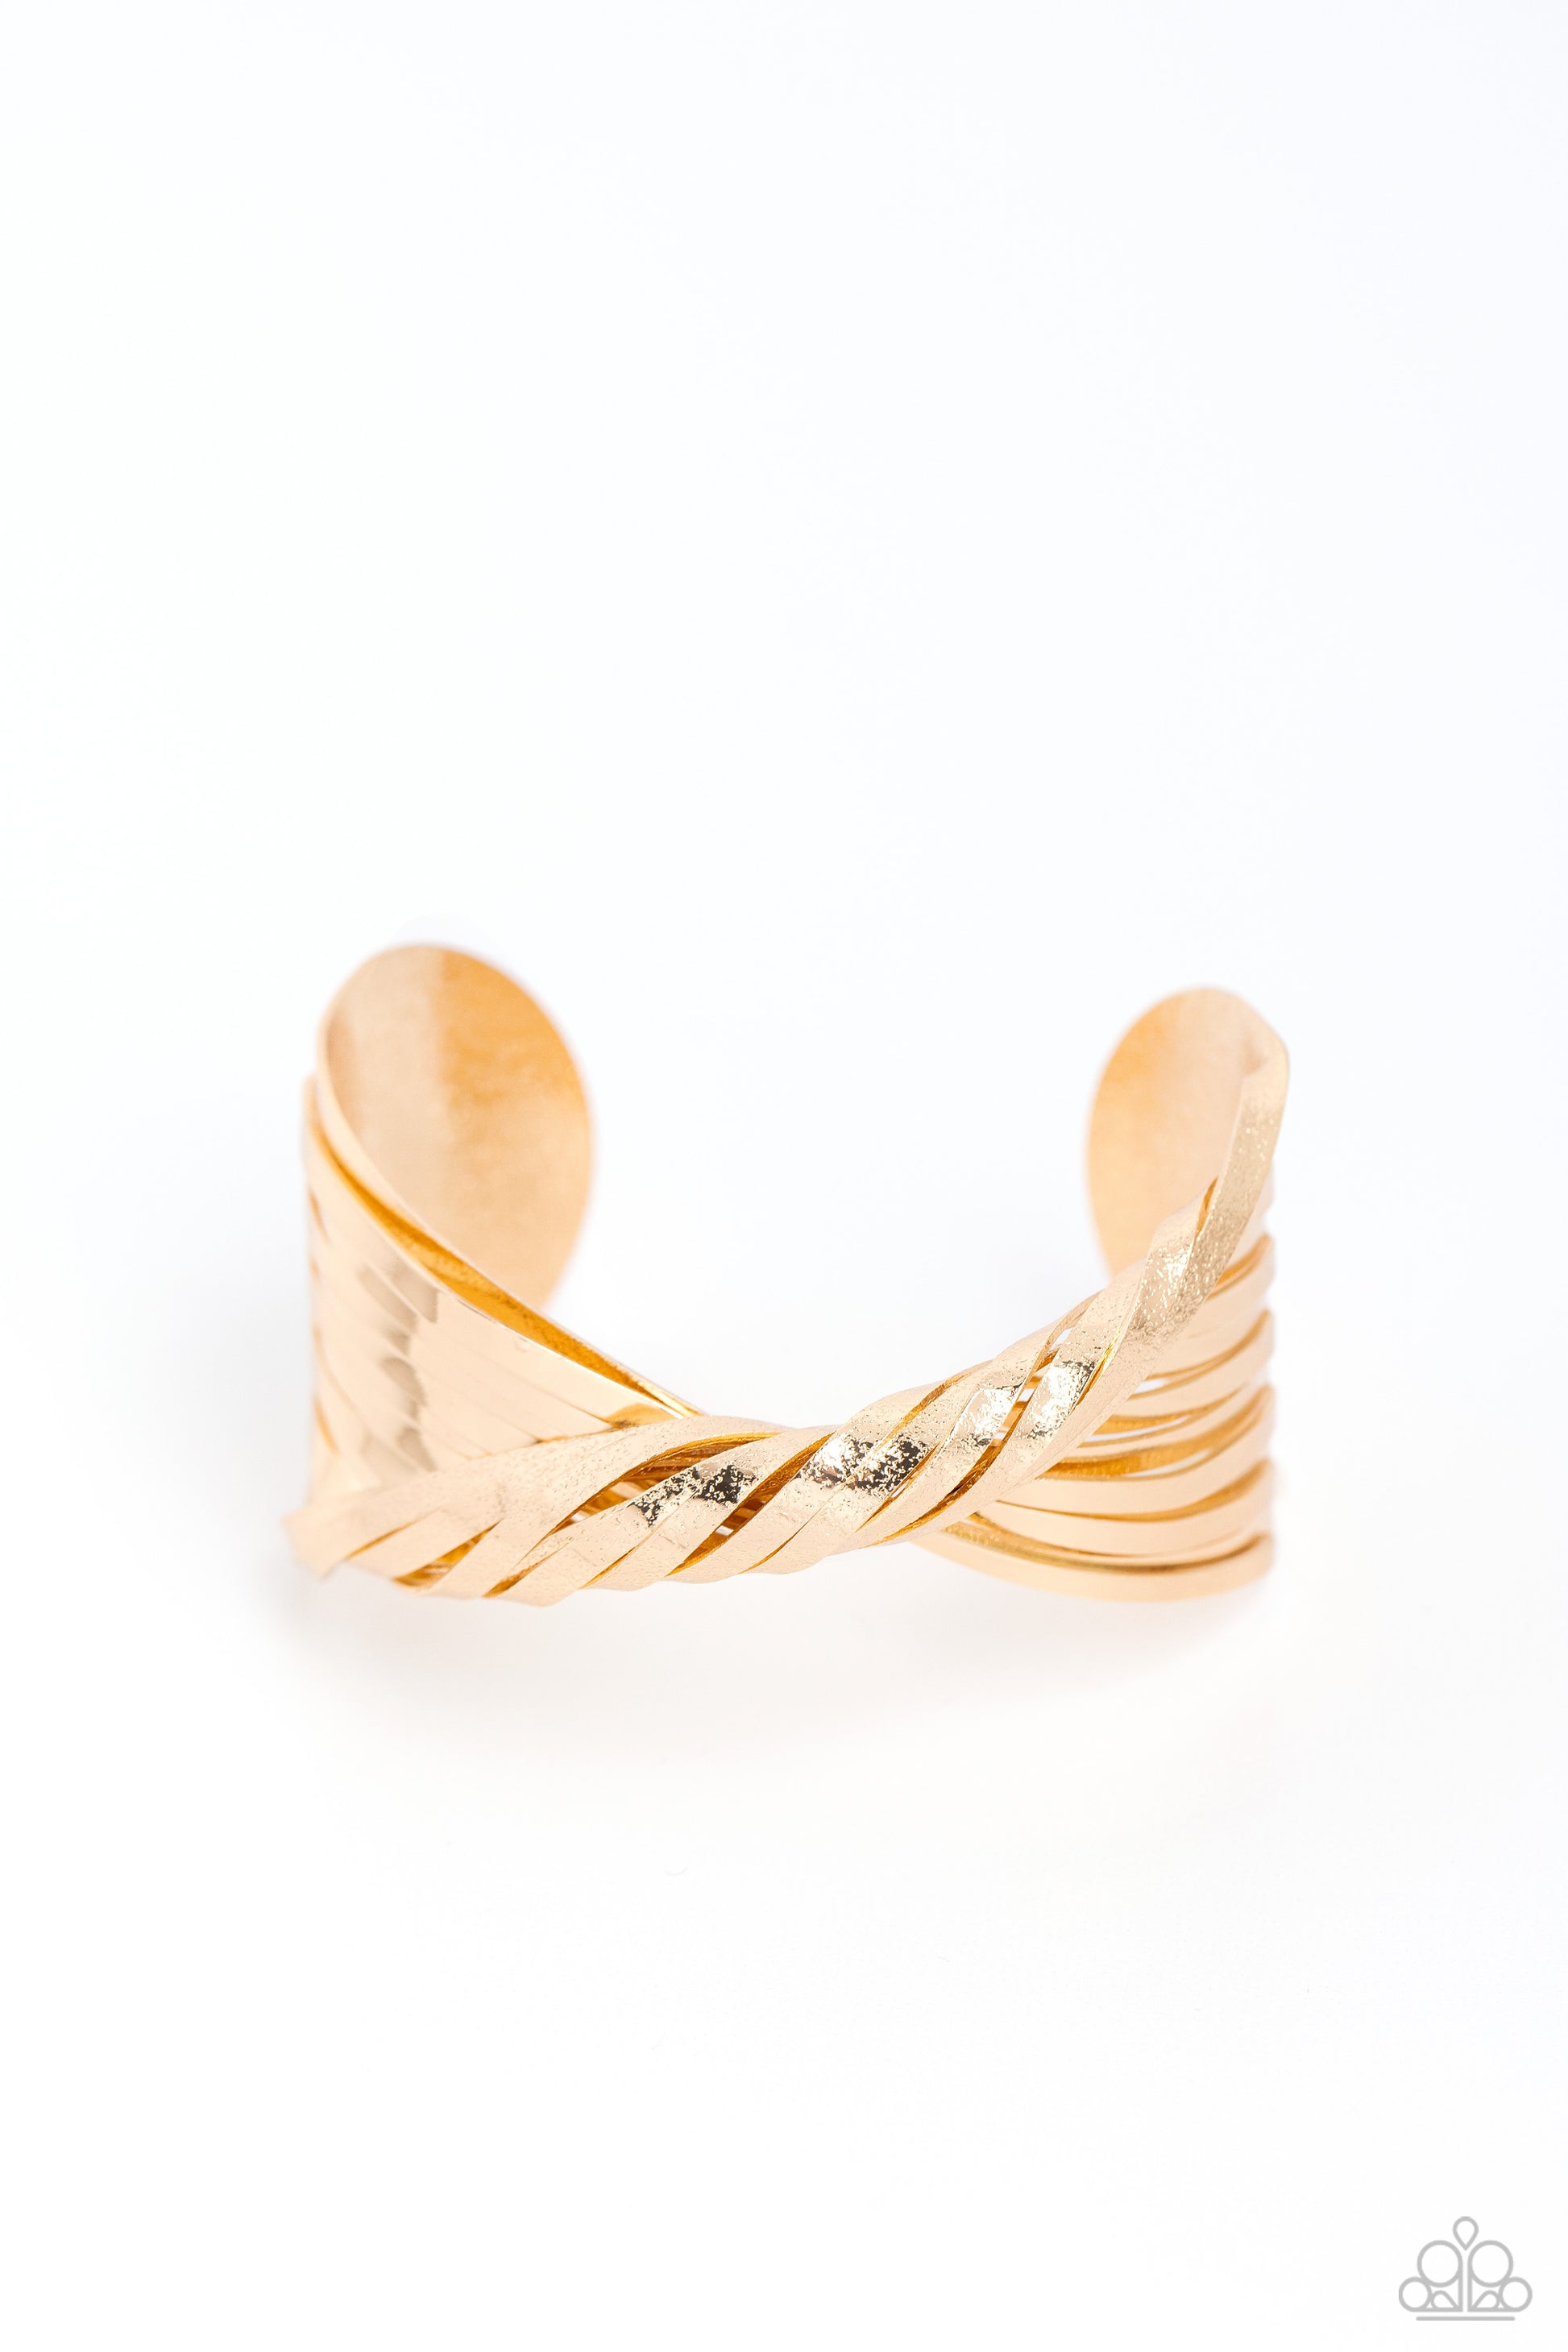 Paparazzi Accessories - Radiant Ribbons - Gold Necklaces featuring sections of glistening hammered surfaces, high-sheen gold ribbons curl across the center of the wrist in a crisscross motion, coalescing into an intense industrial cuff.  Sold as one individual bracelet.